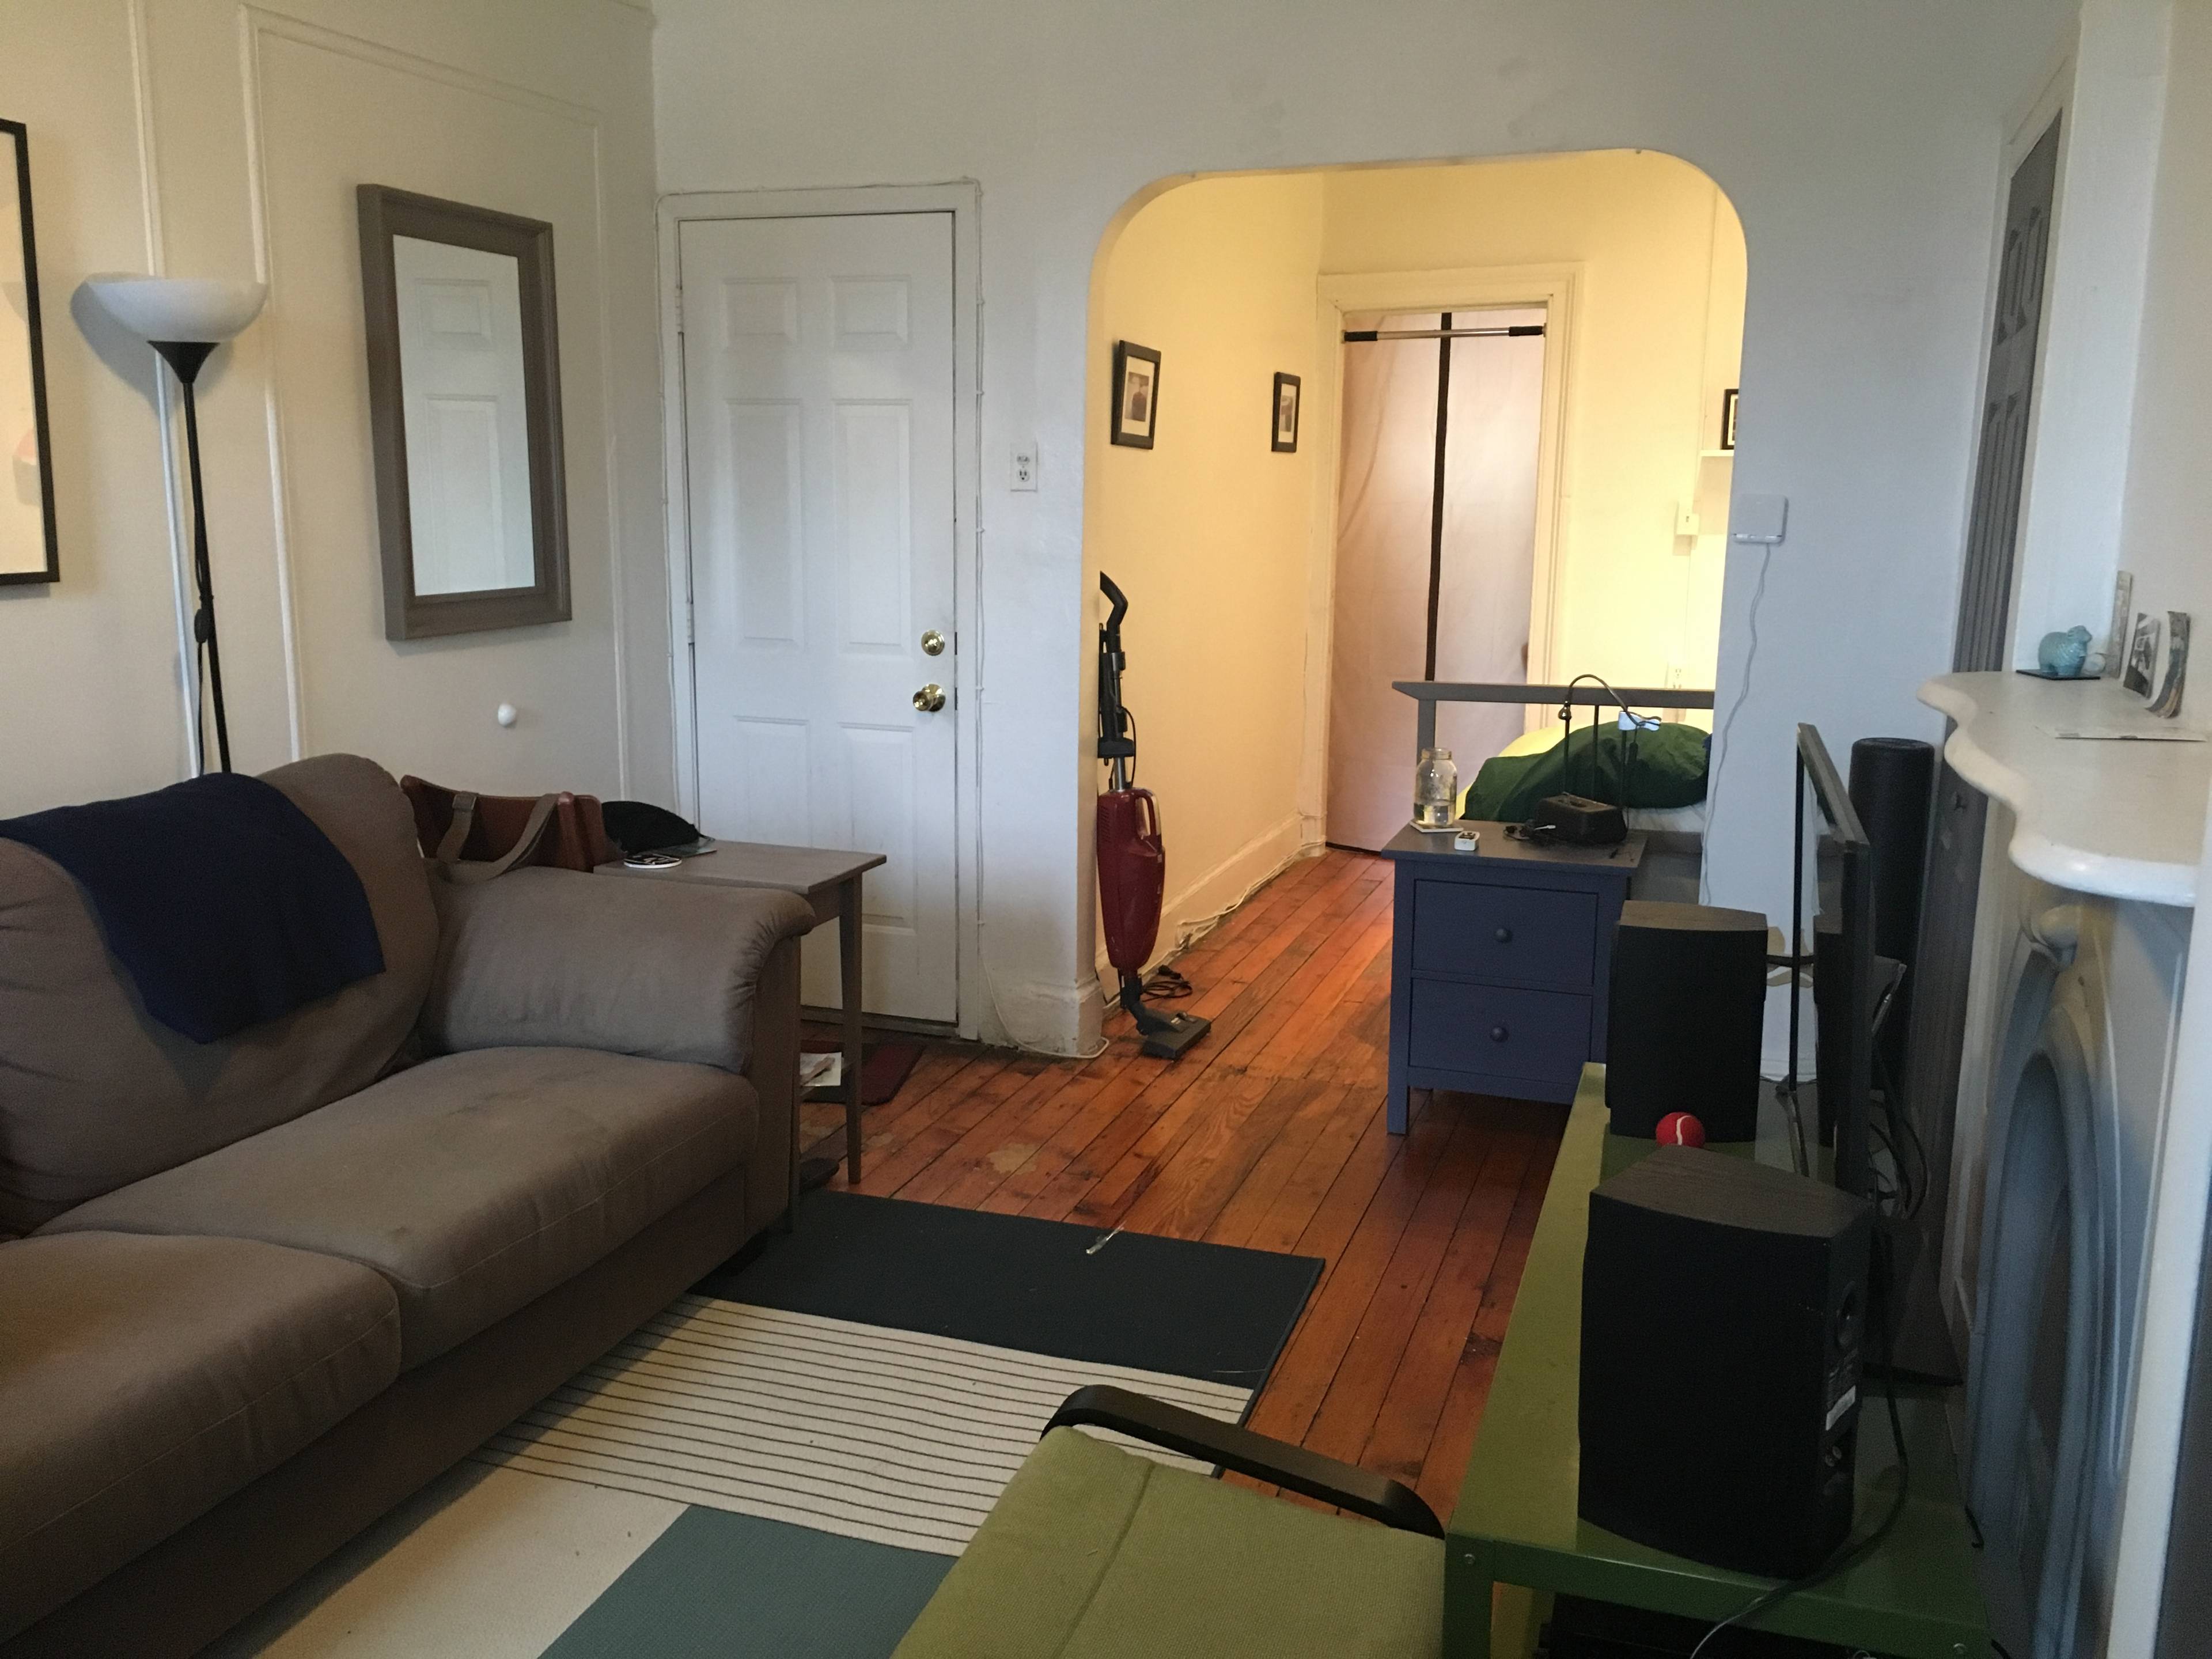 Convertible 2 Bedroom Gem!!! SPACIOUS I Sun Drenched I One of a kind I Northside Brooklyn!!!